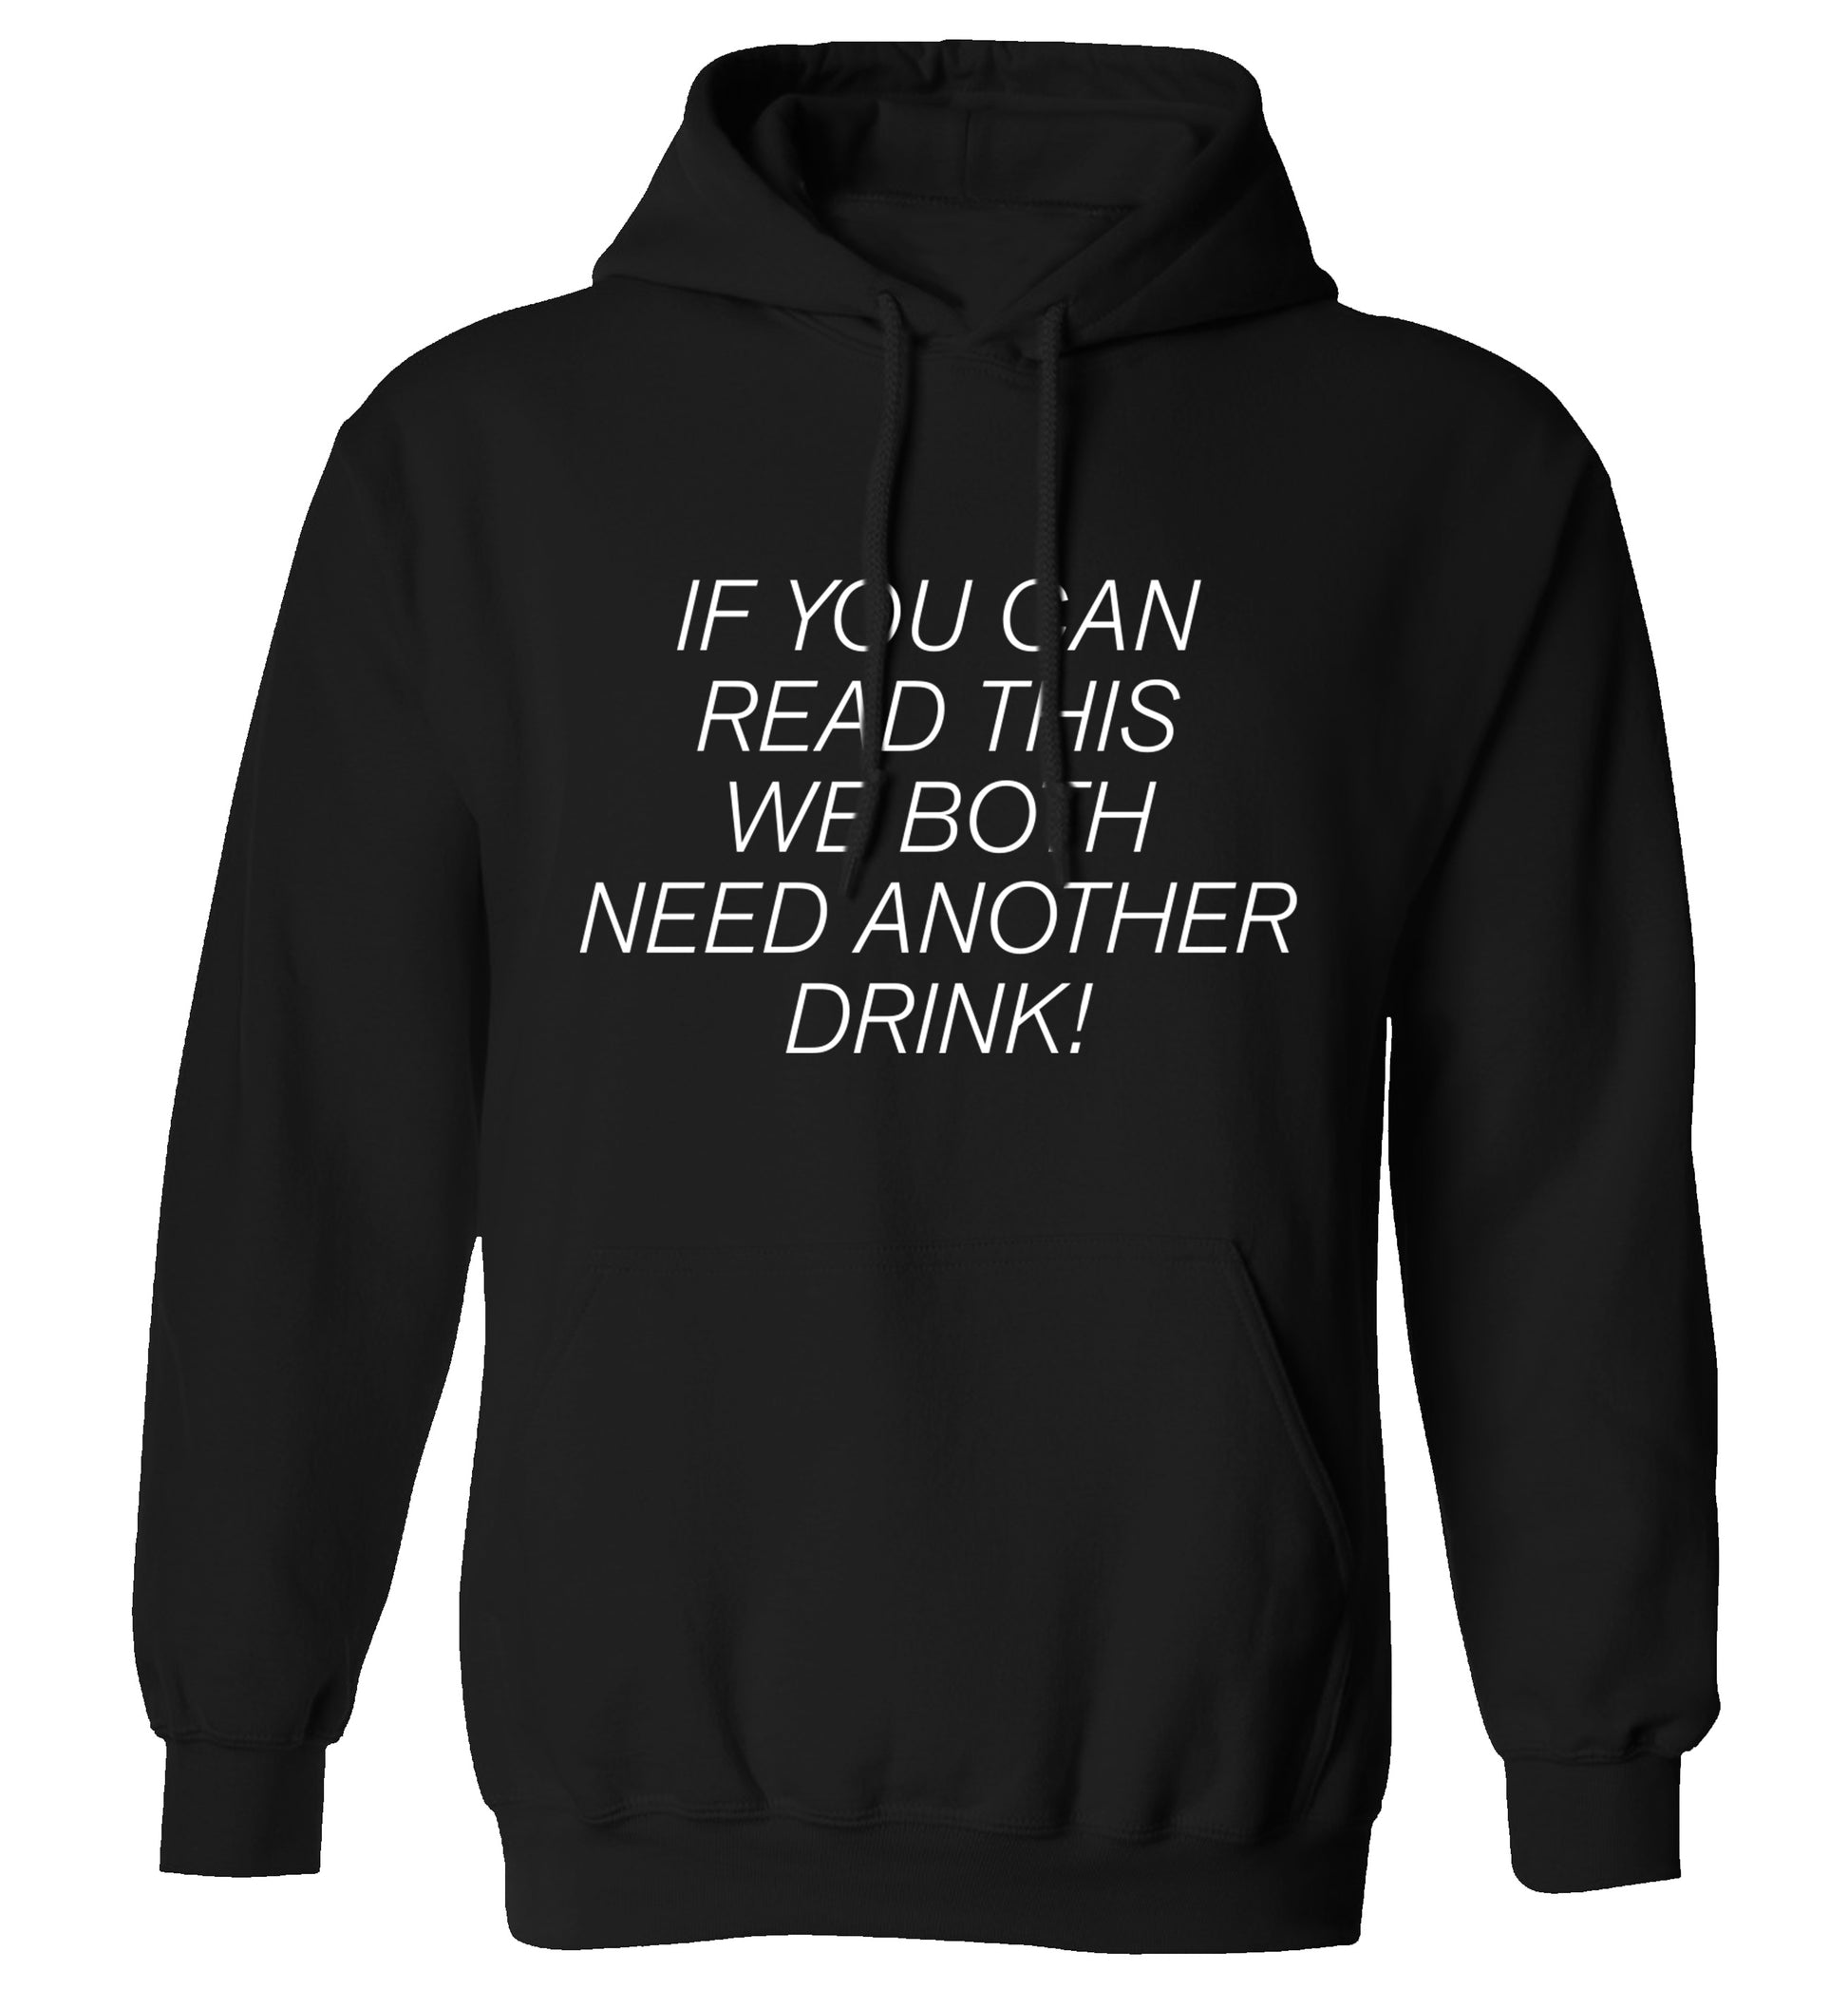 If you can read this we both need another drink! adults unisex black hoodie 2XL